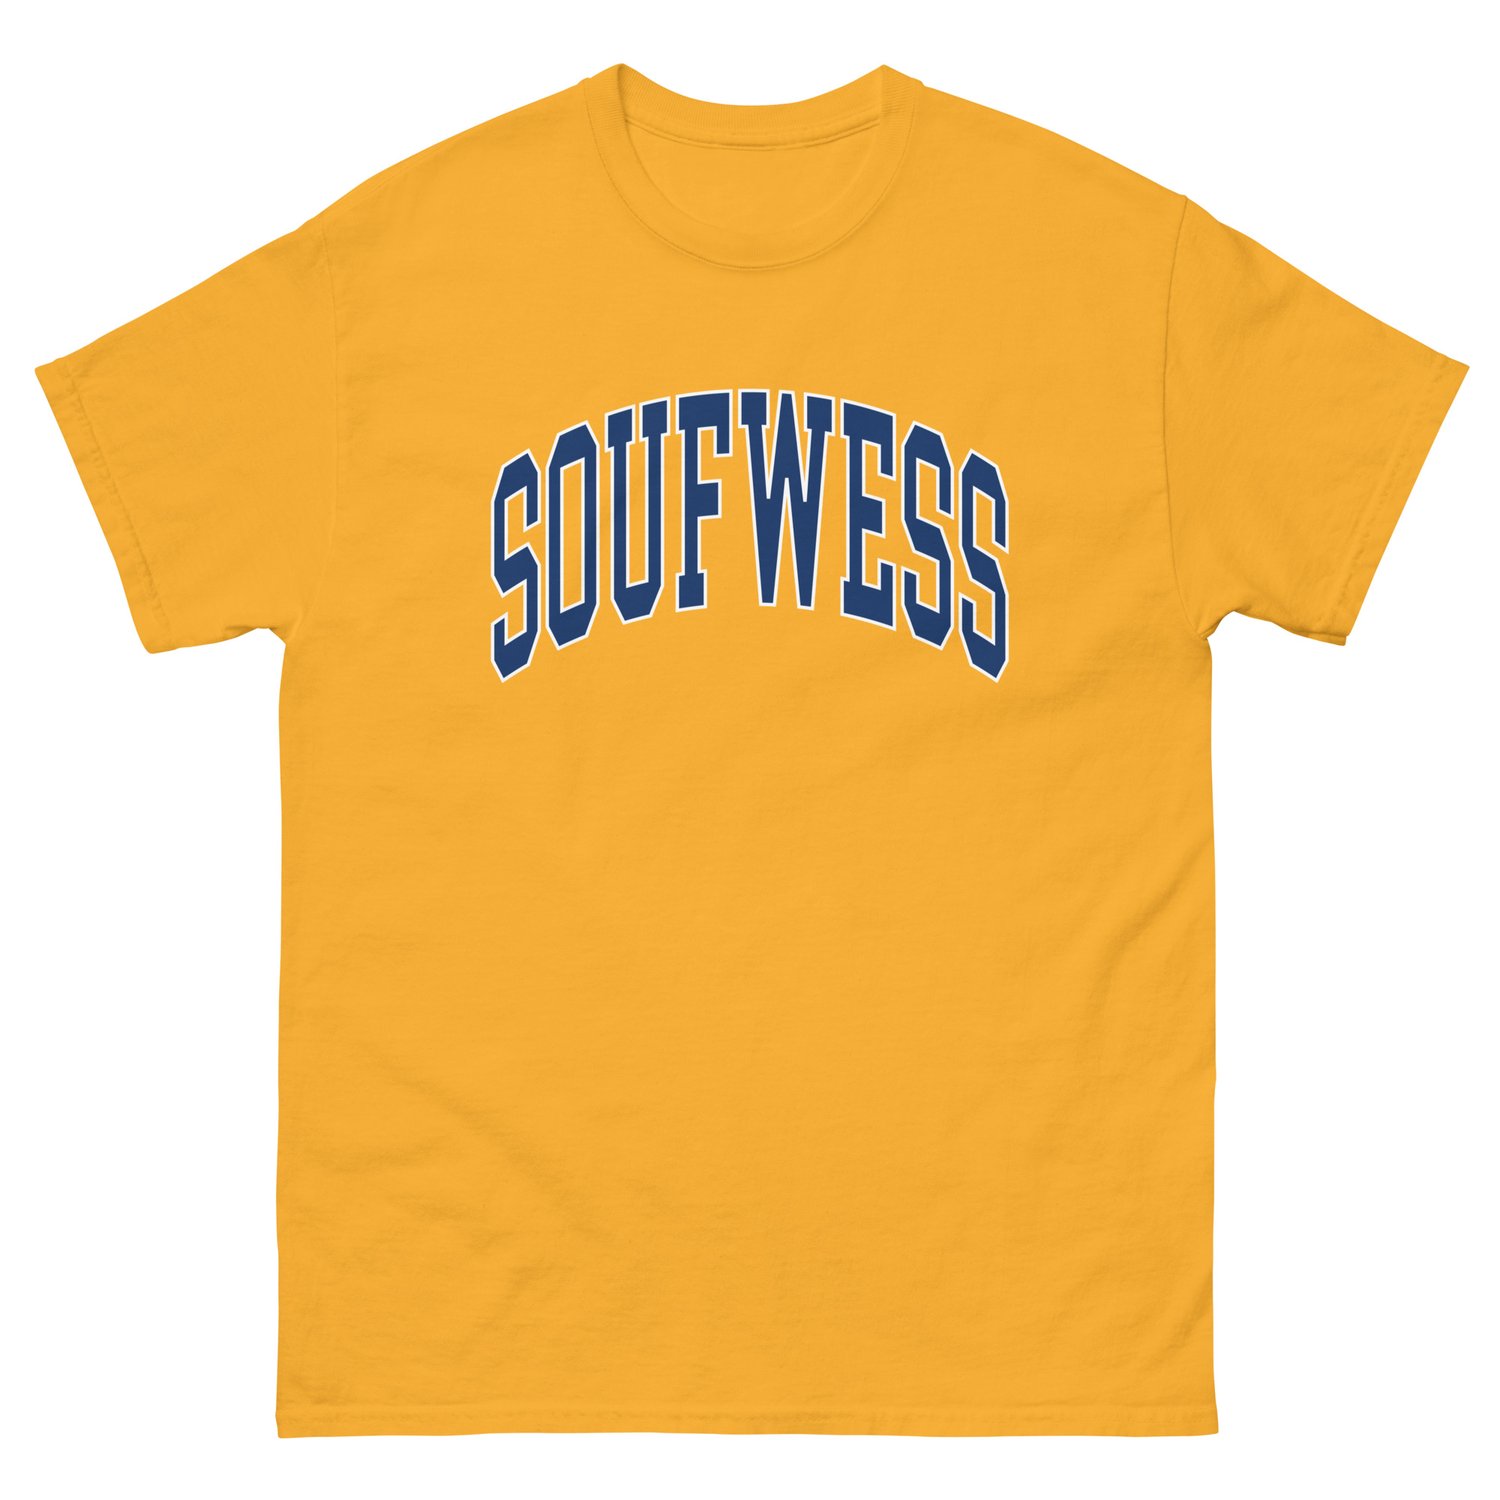 SOUFWESS CLASSIC (Gold)